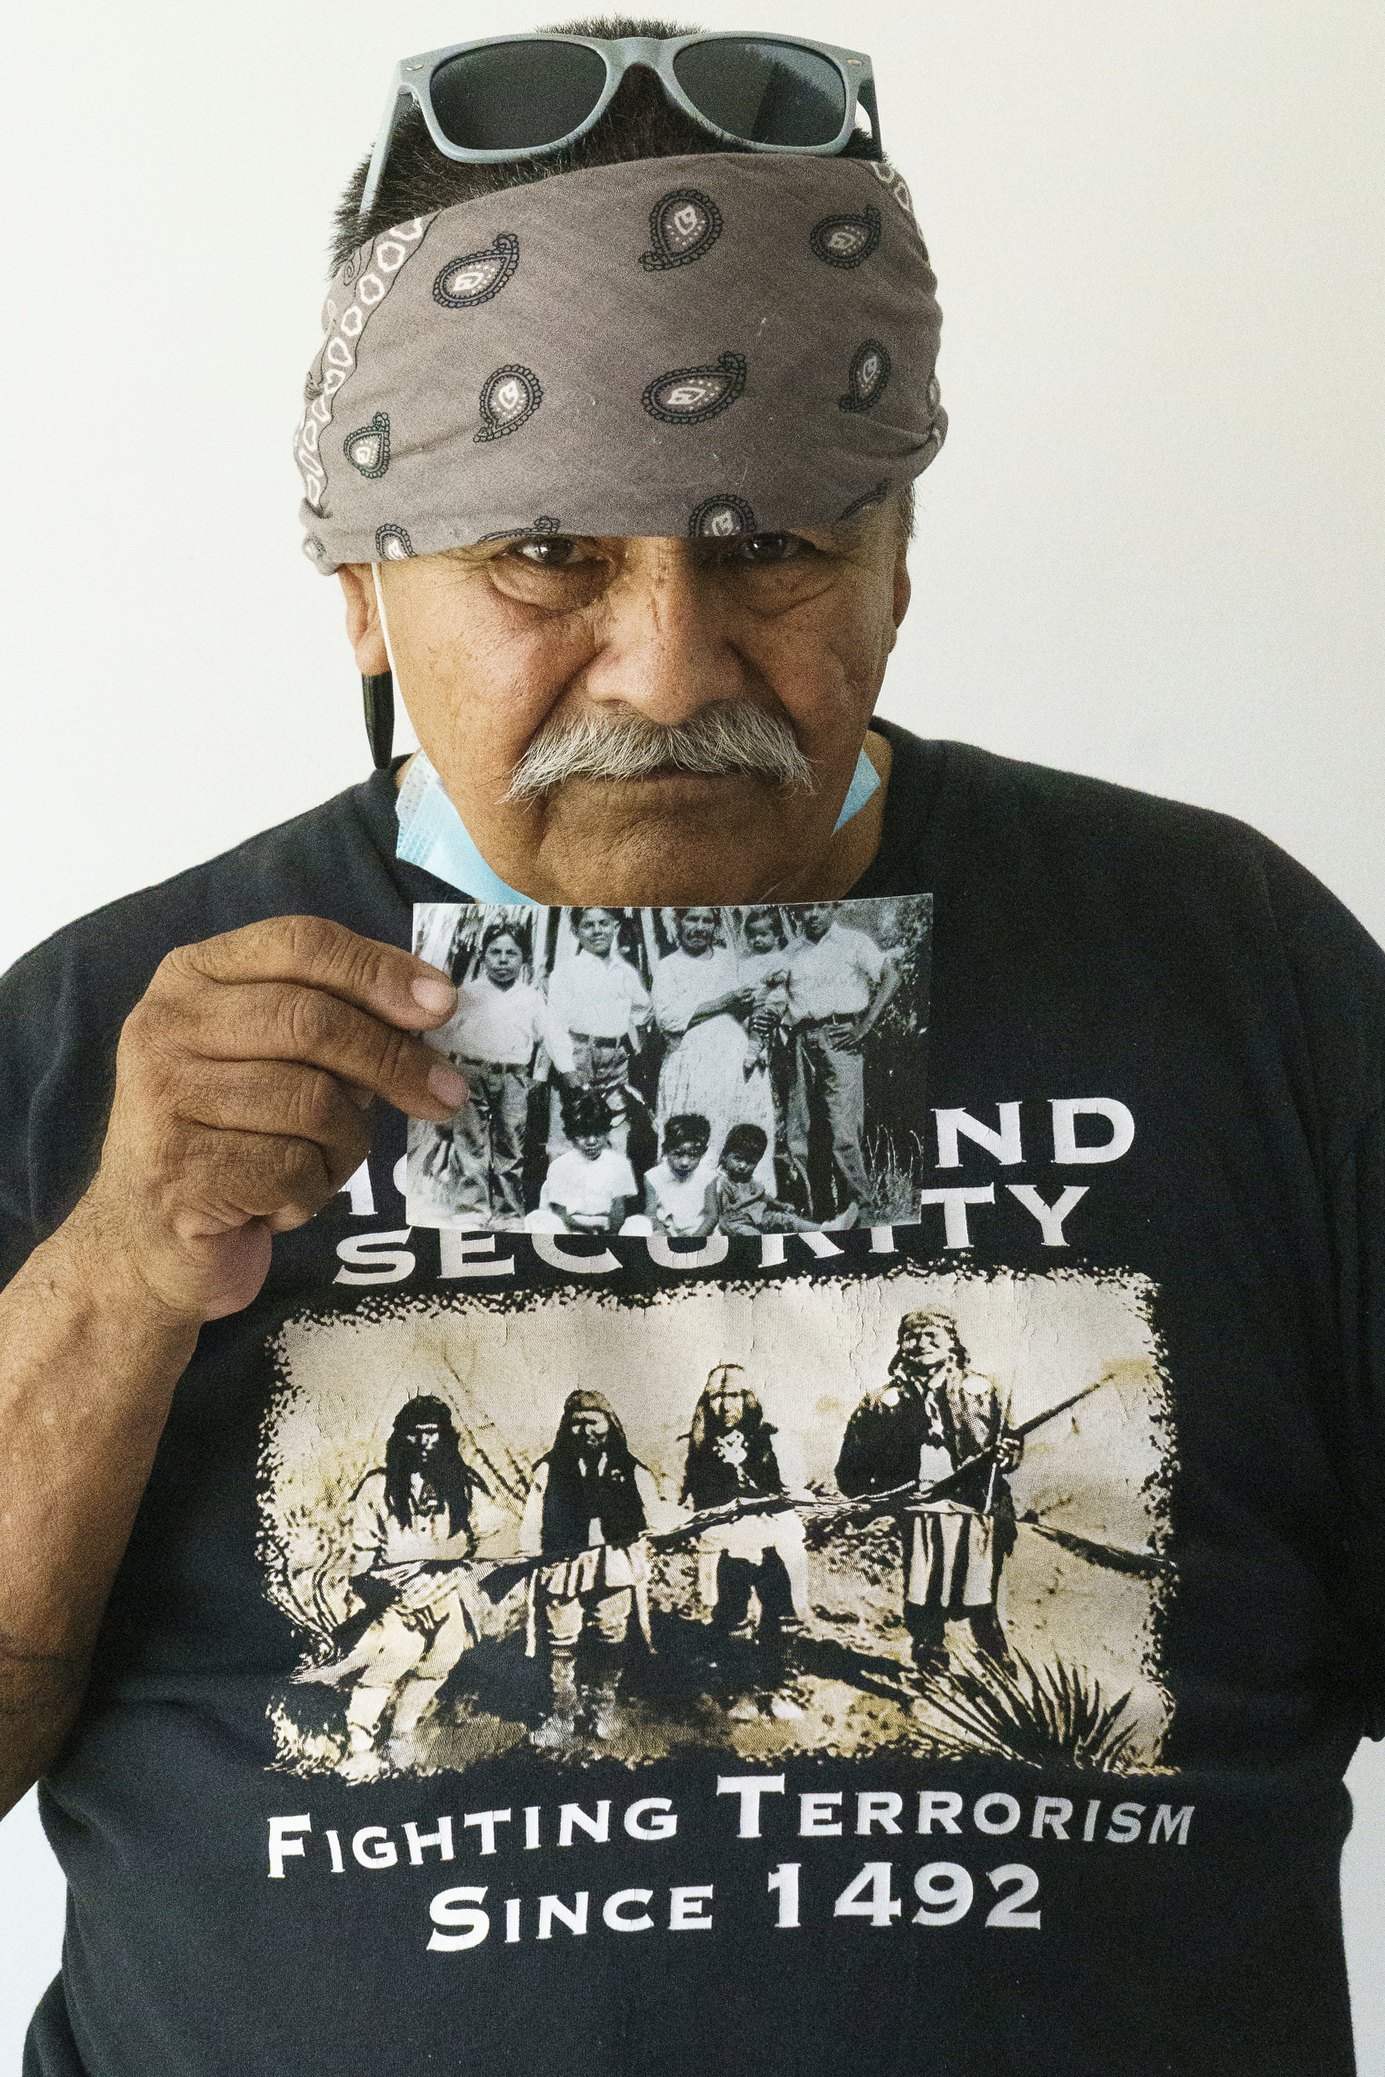 Man with a bandana on his head holding an old black and white photo.